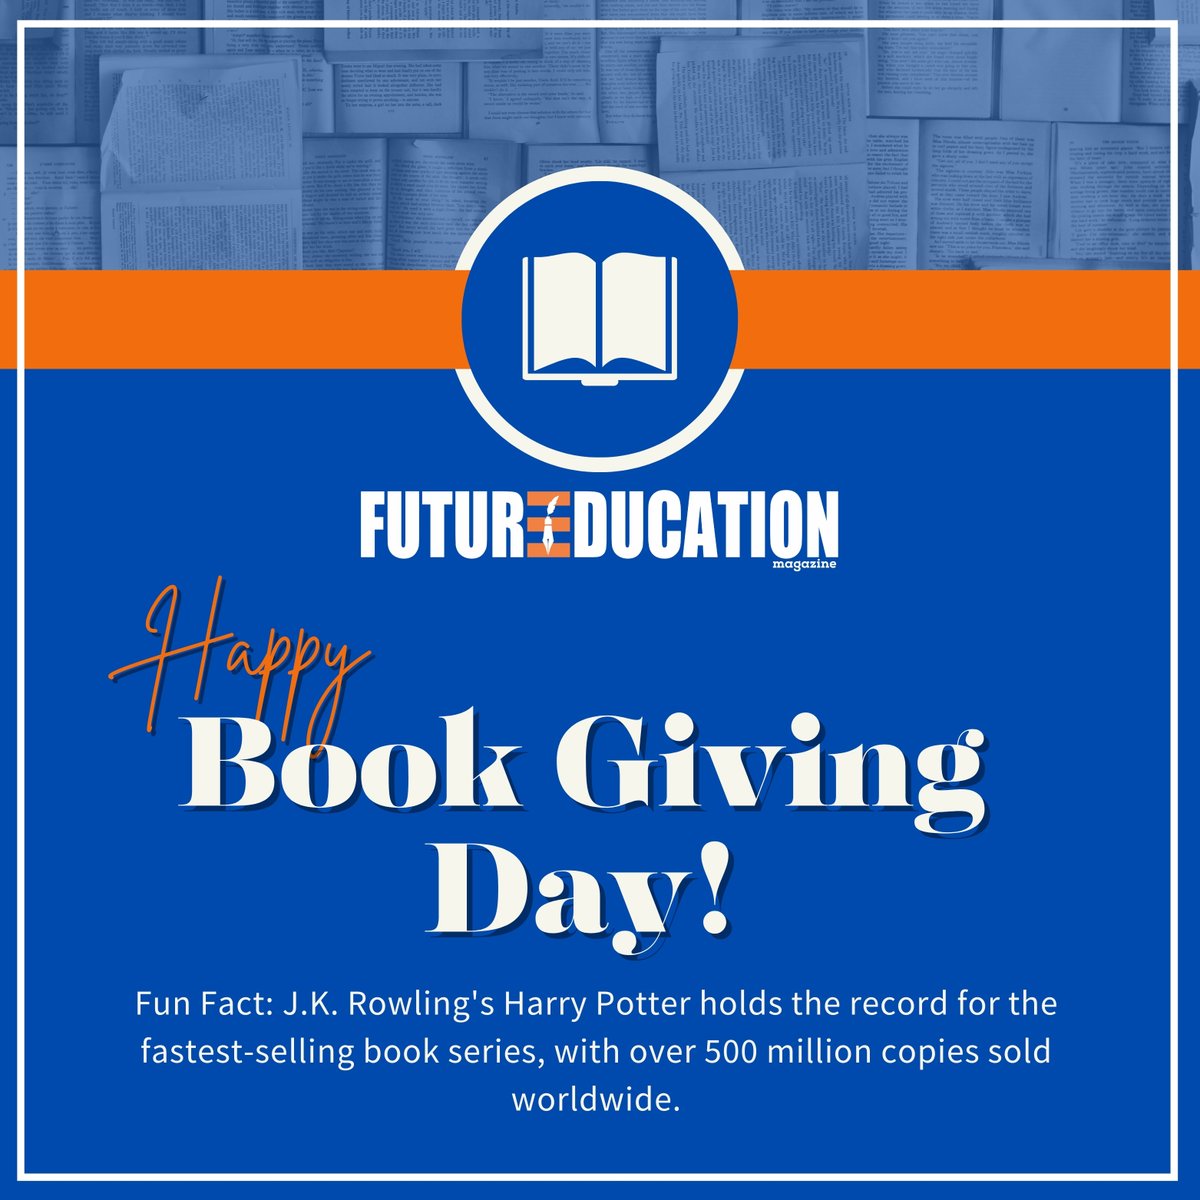 Happy Book Giving Day! Share the love of reading by giving someone a book today!

Follow For More Future Education Magazine

#BookGivingDay #SpreadTheJoyOfReading #GiftABook #LiteraryLove #ShareAStory #BookishKindness #ReadersGift #BookLove #GiveABookSpreadAStory